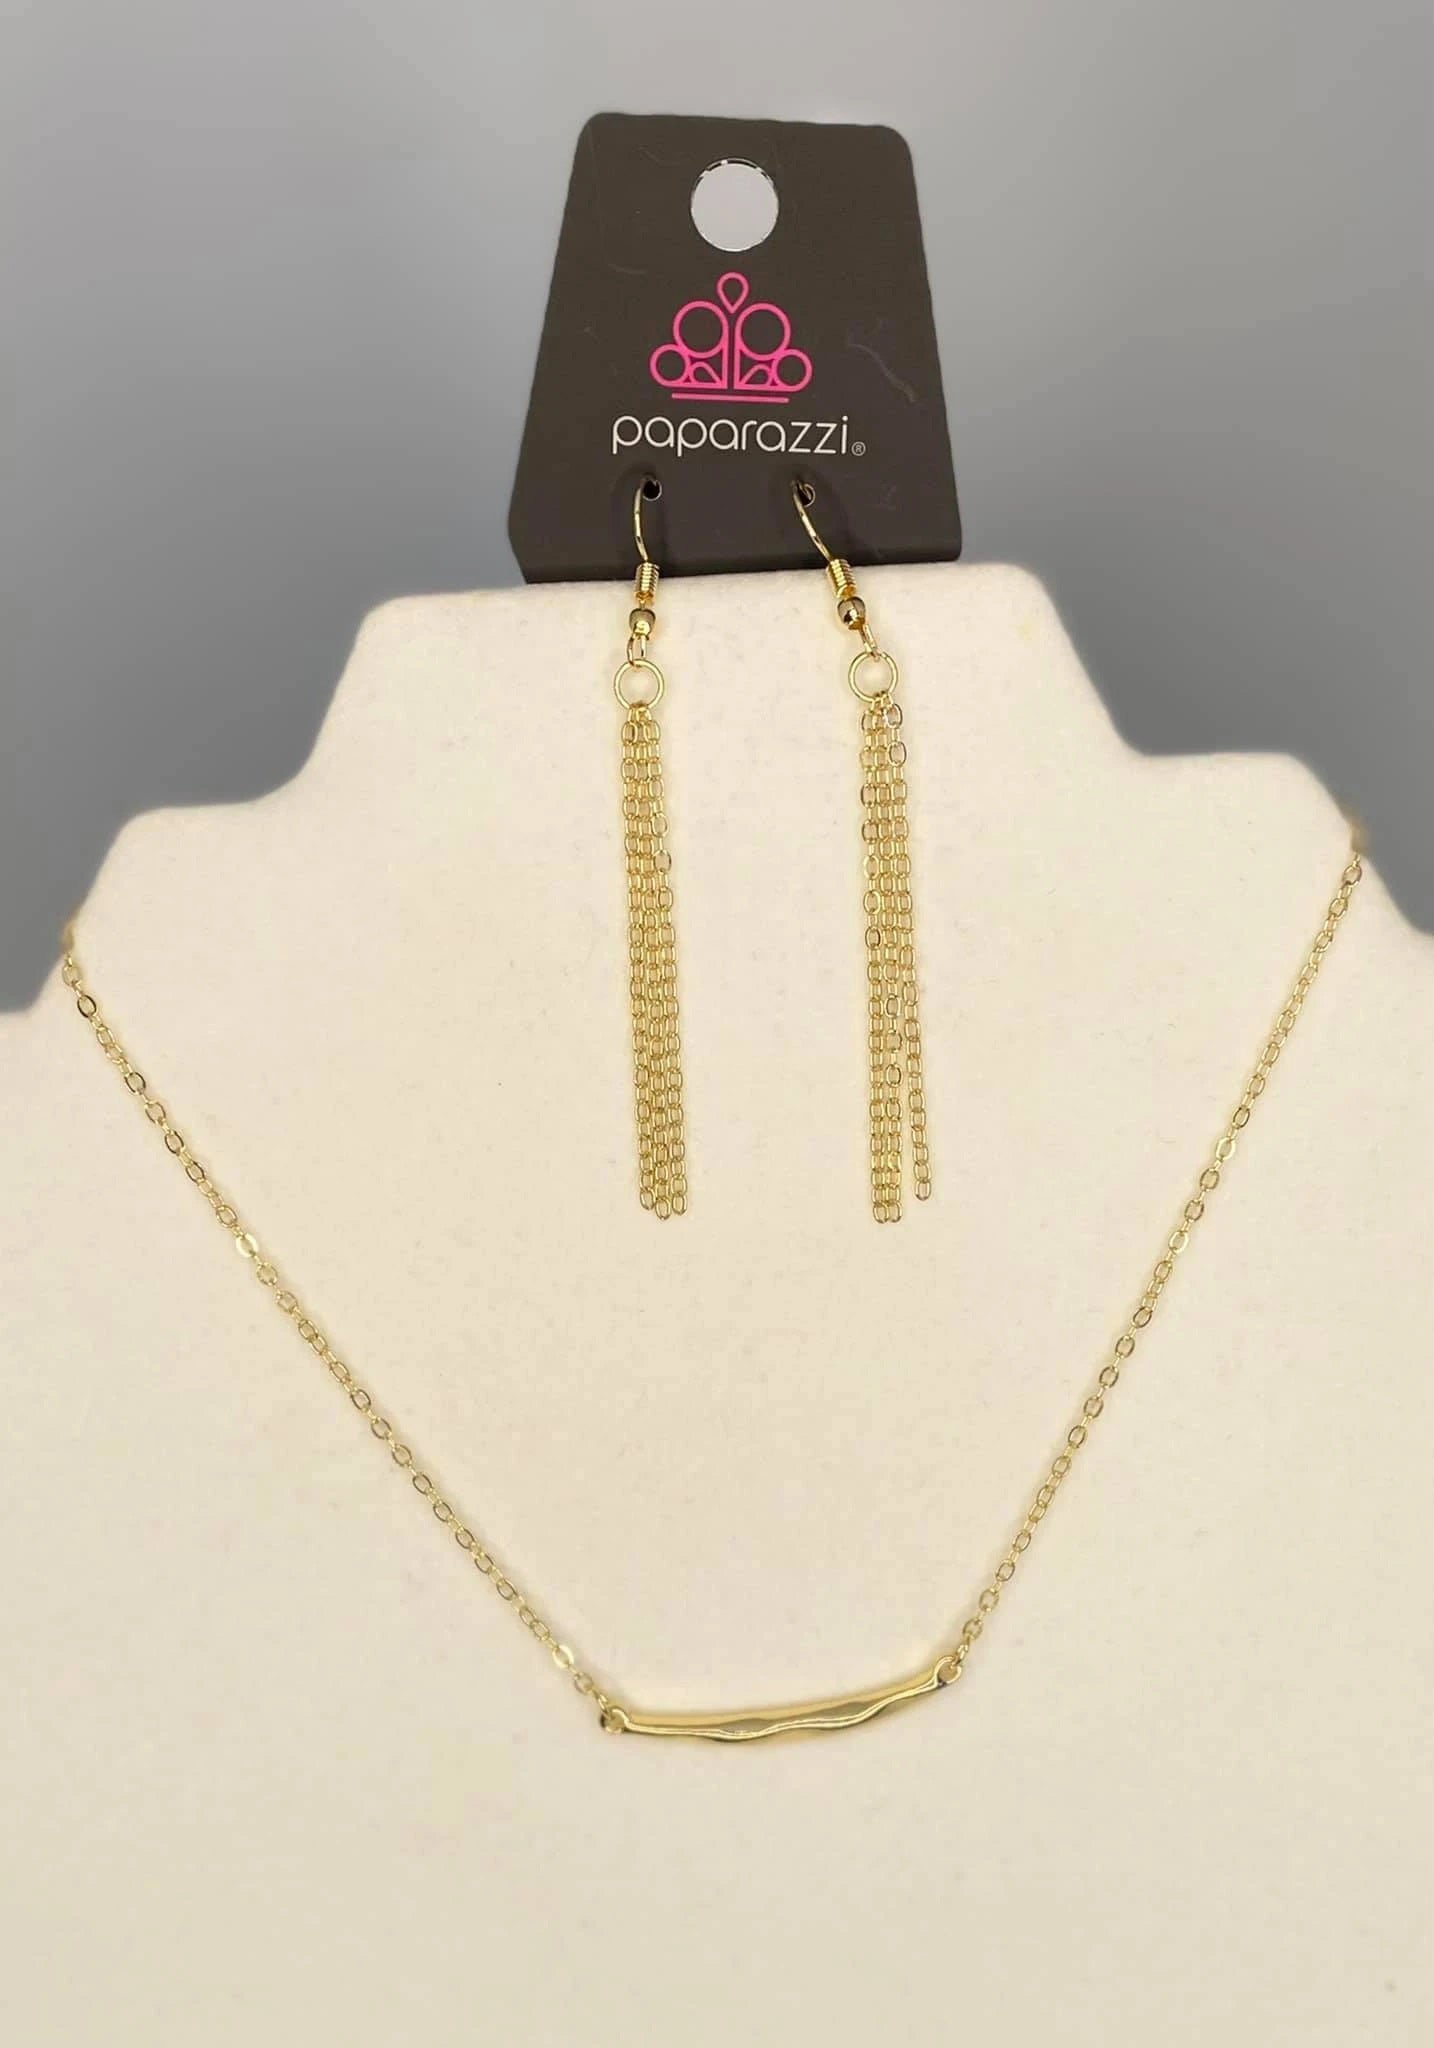 Paparazzi Taking It Easy Gold Choker Necklace - Fashion Fix Exclusive January 2021